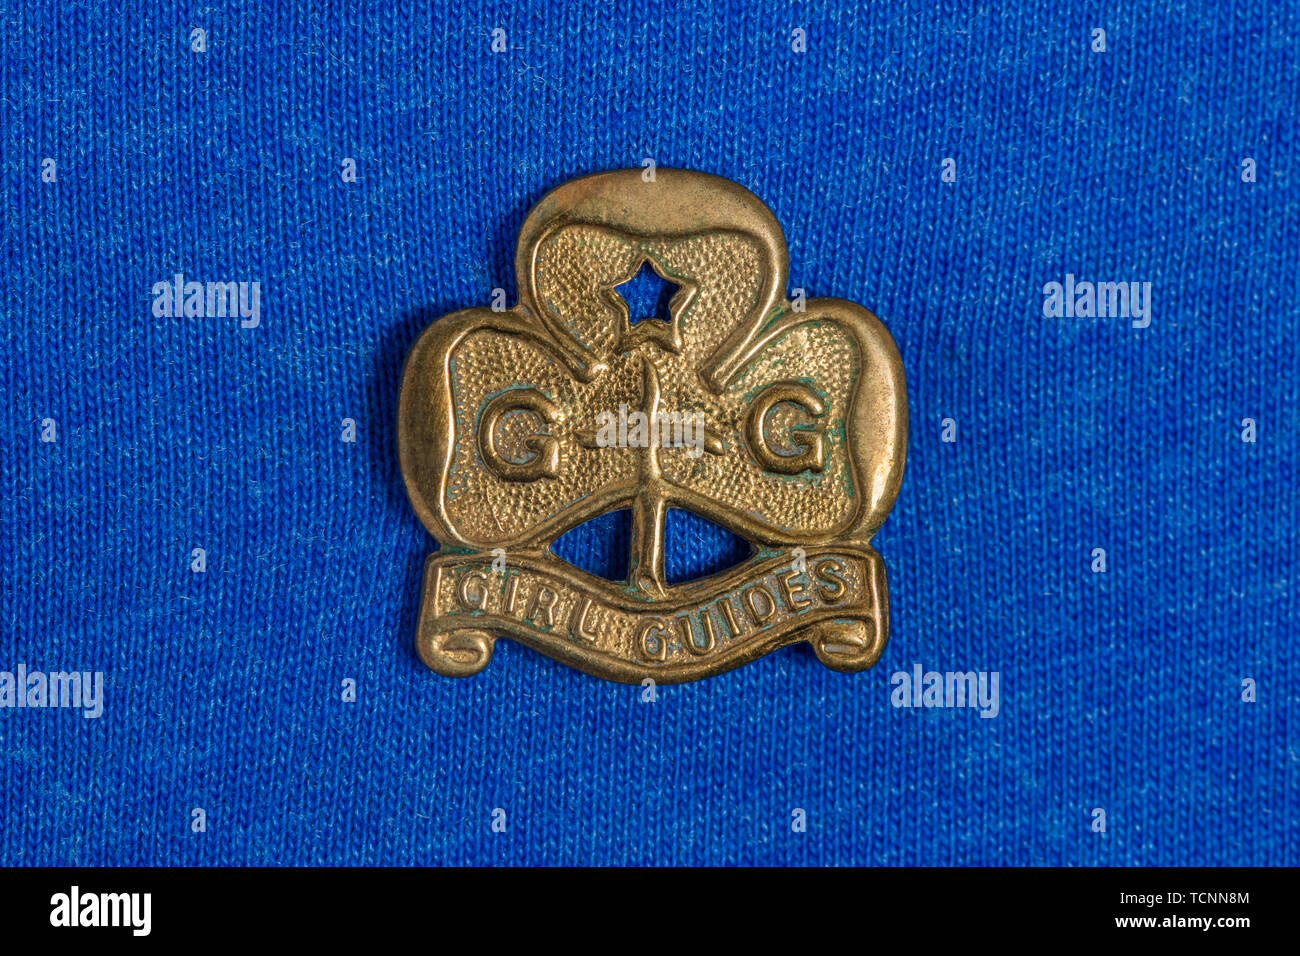 A vintage brass Girl Guides badge shot on a blue cotton background. Stock Photo